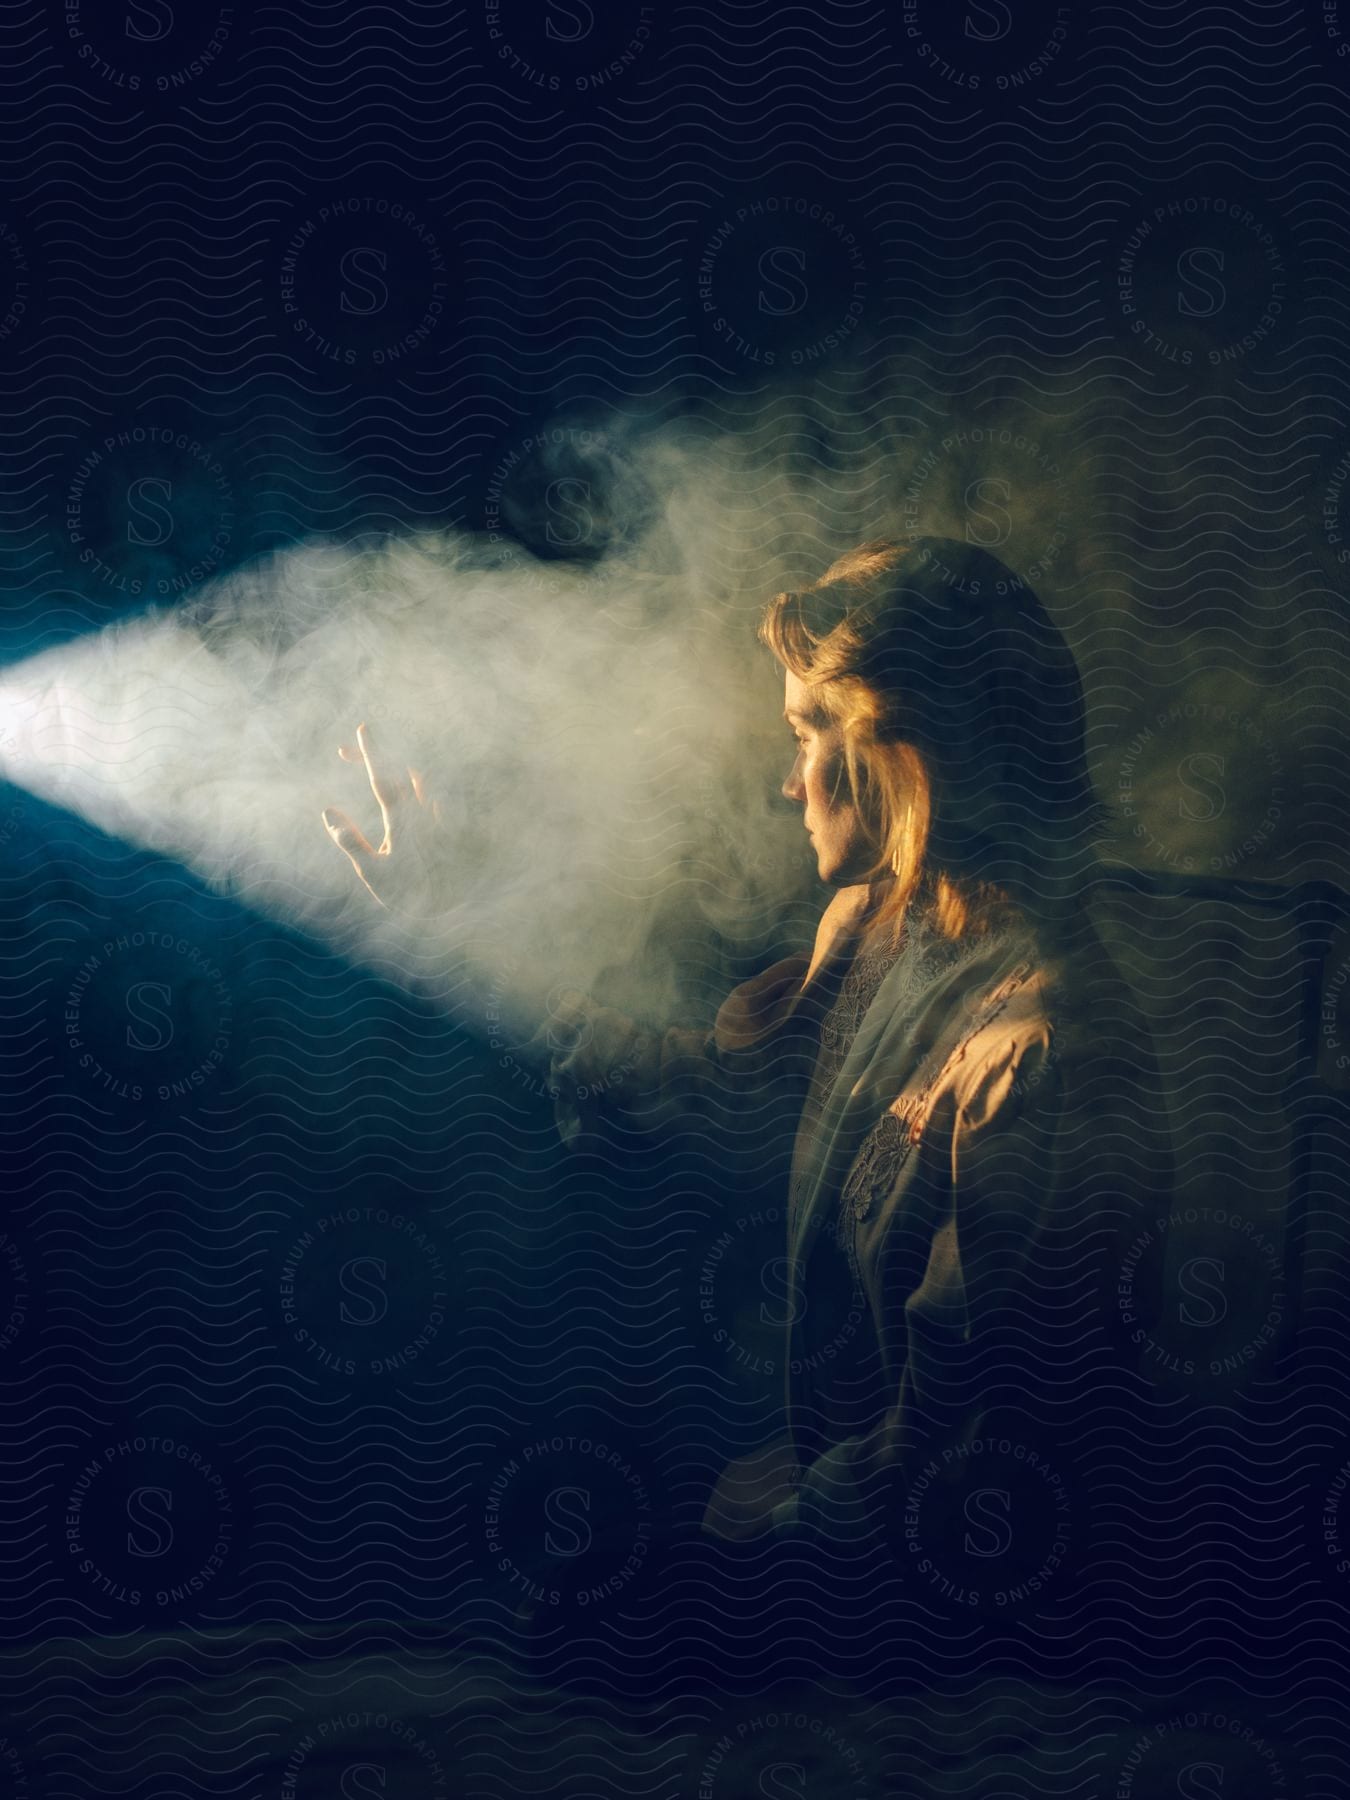 A woman sitting in a dark smoke filled room reaches her hand out as light from a film projector shines upon her